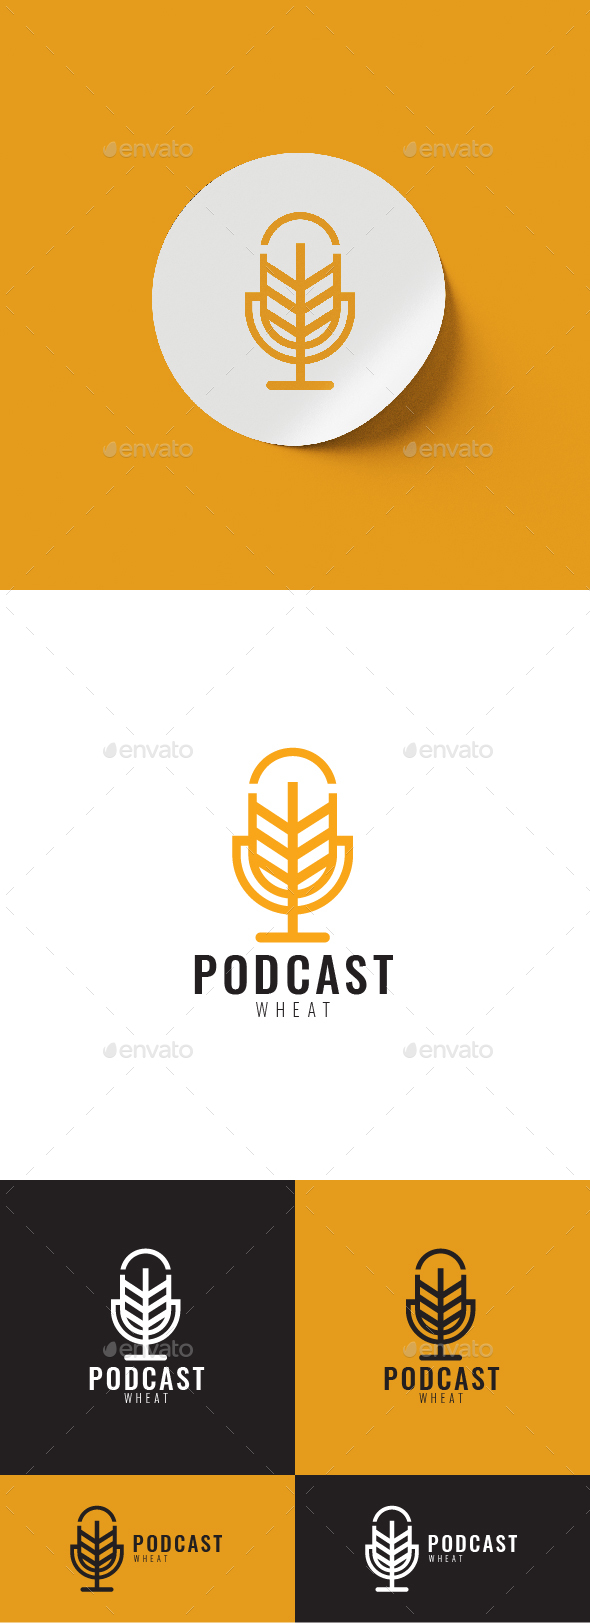 [DOWNLOAD]Wheat Podcast Logo Template